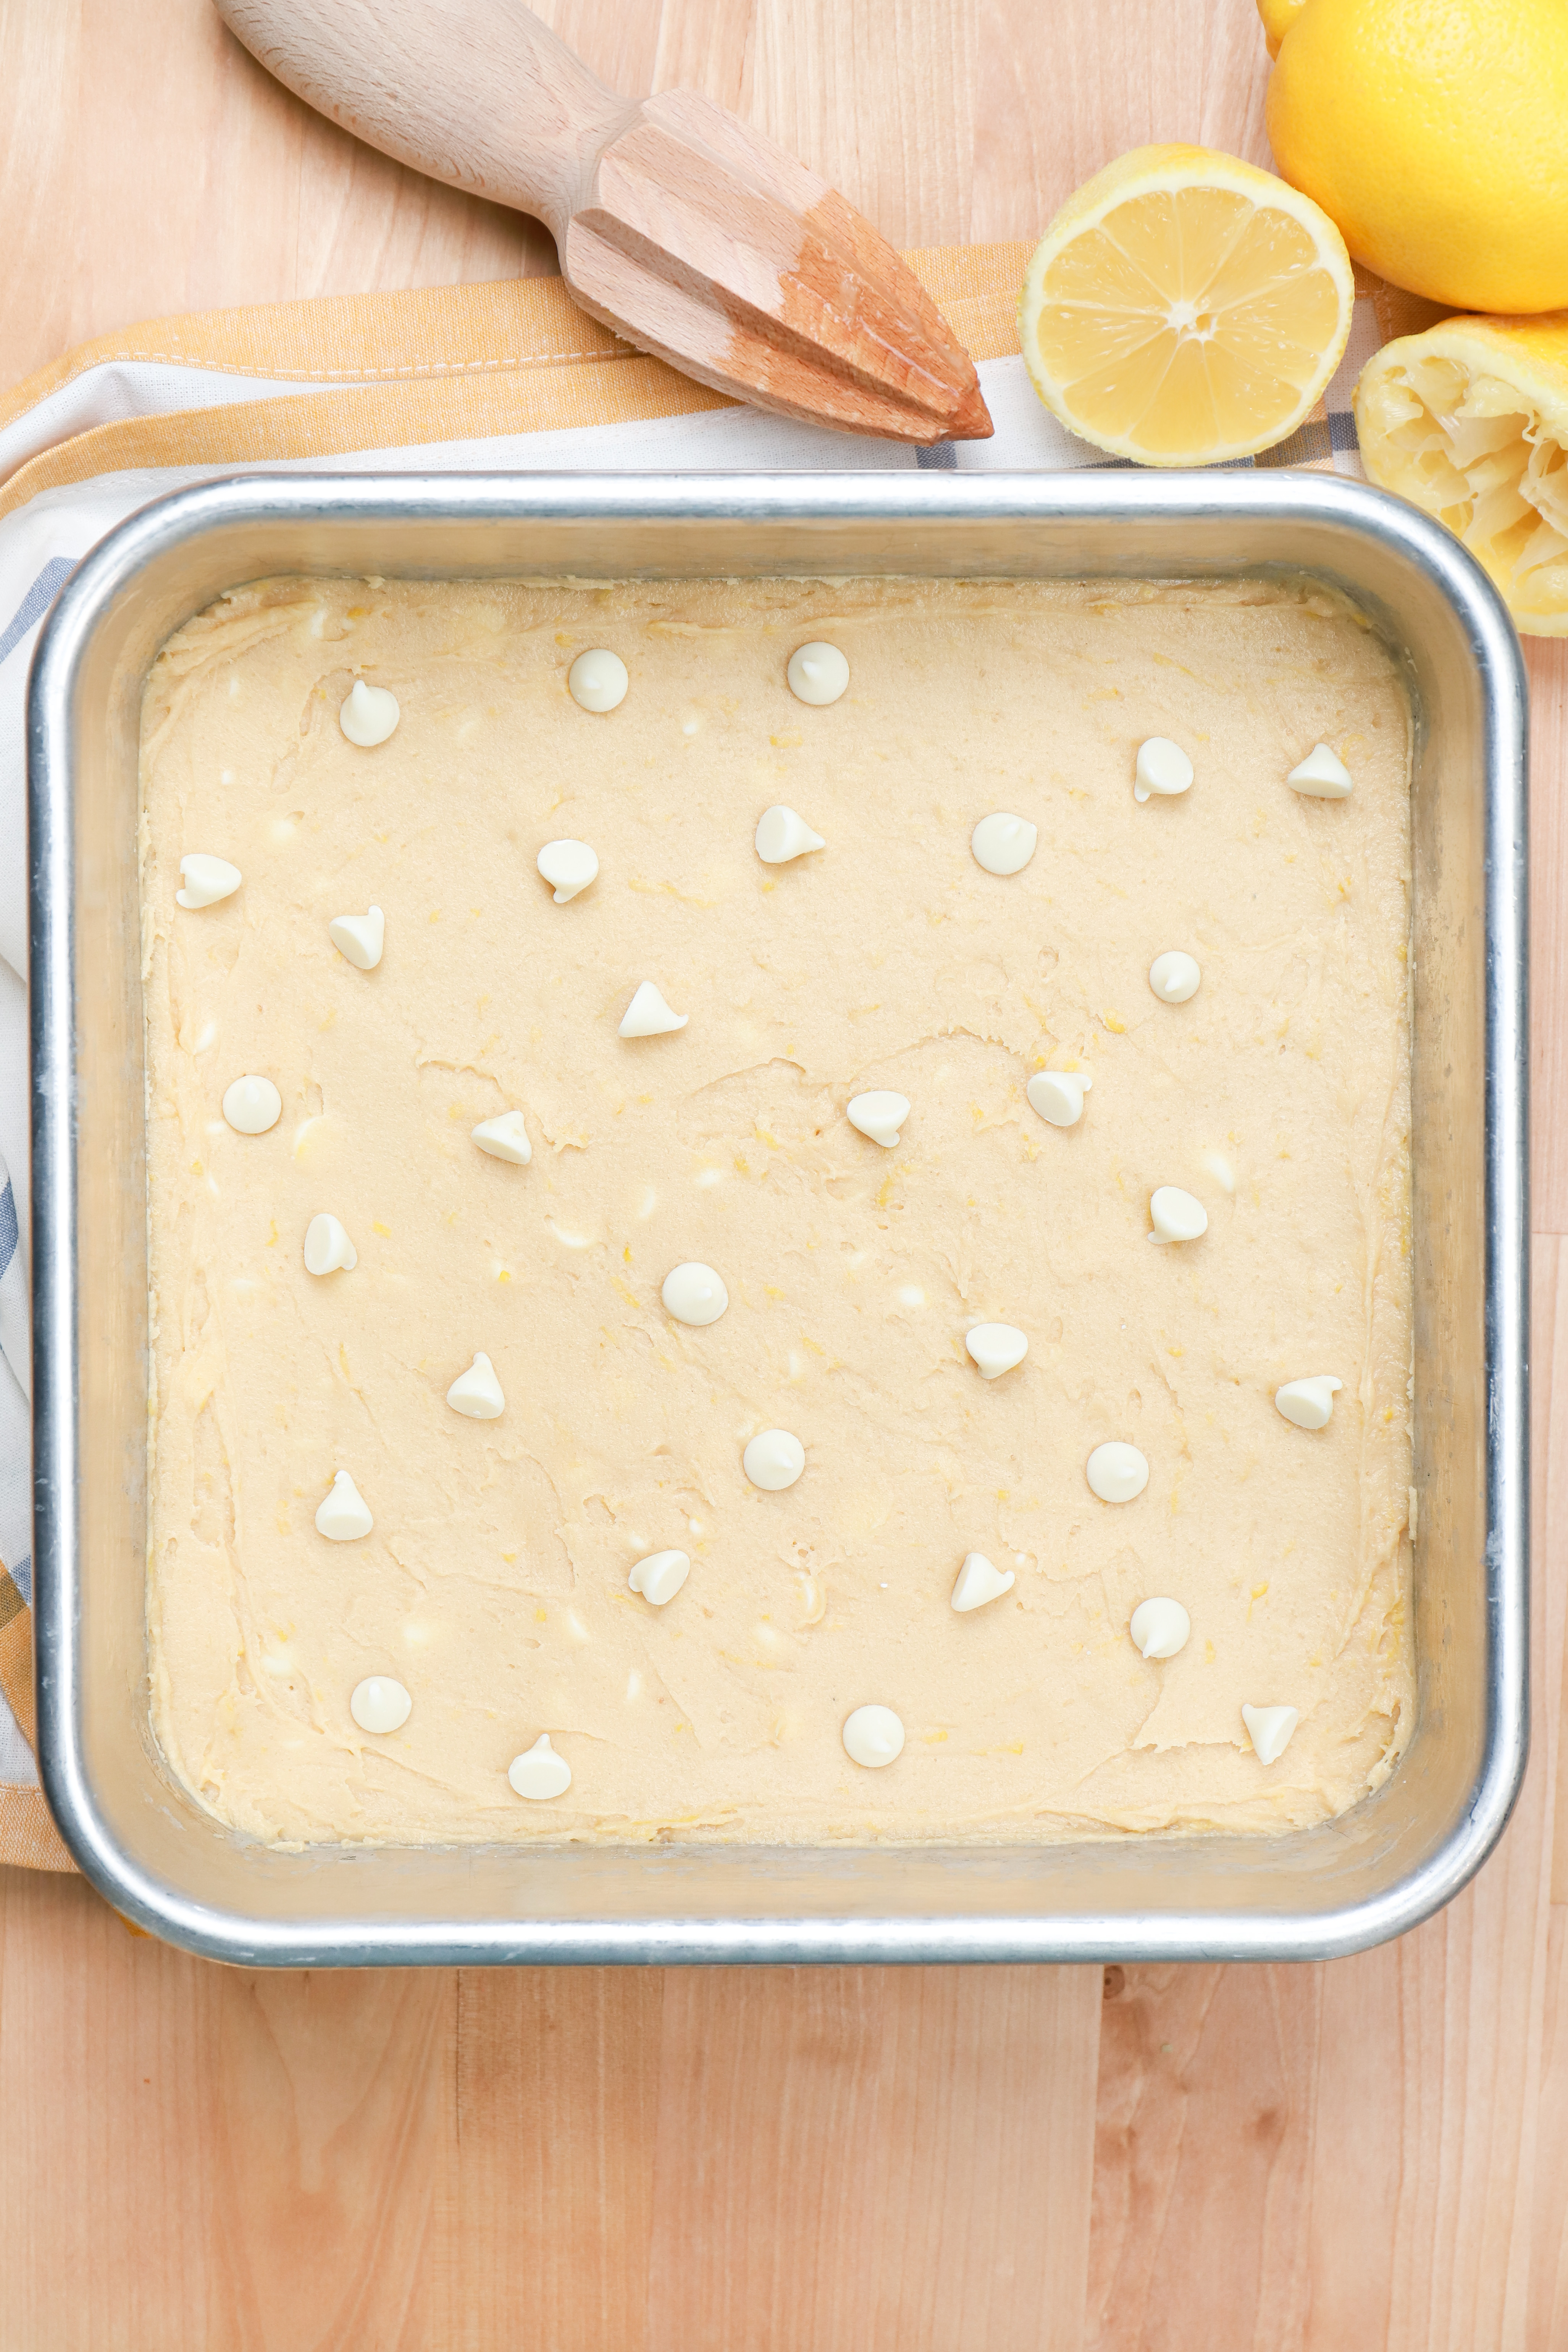 White chocolate lemon blondies dough spread into bottom of aluminum baking dish and sprinkled with white chocolate chips.